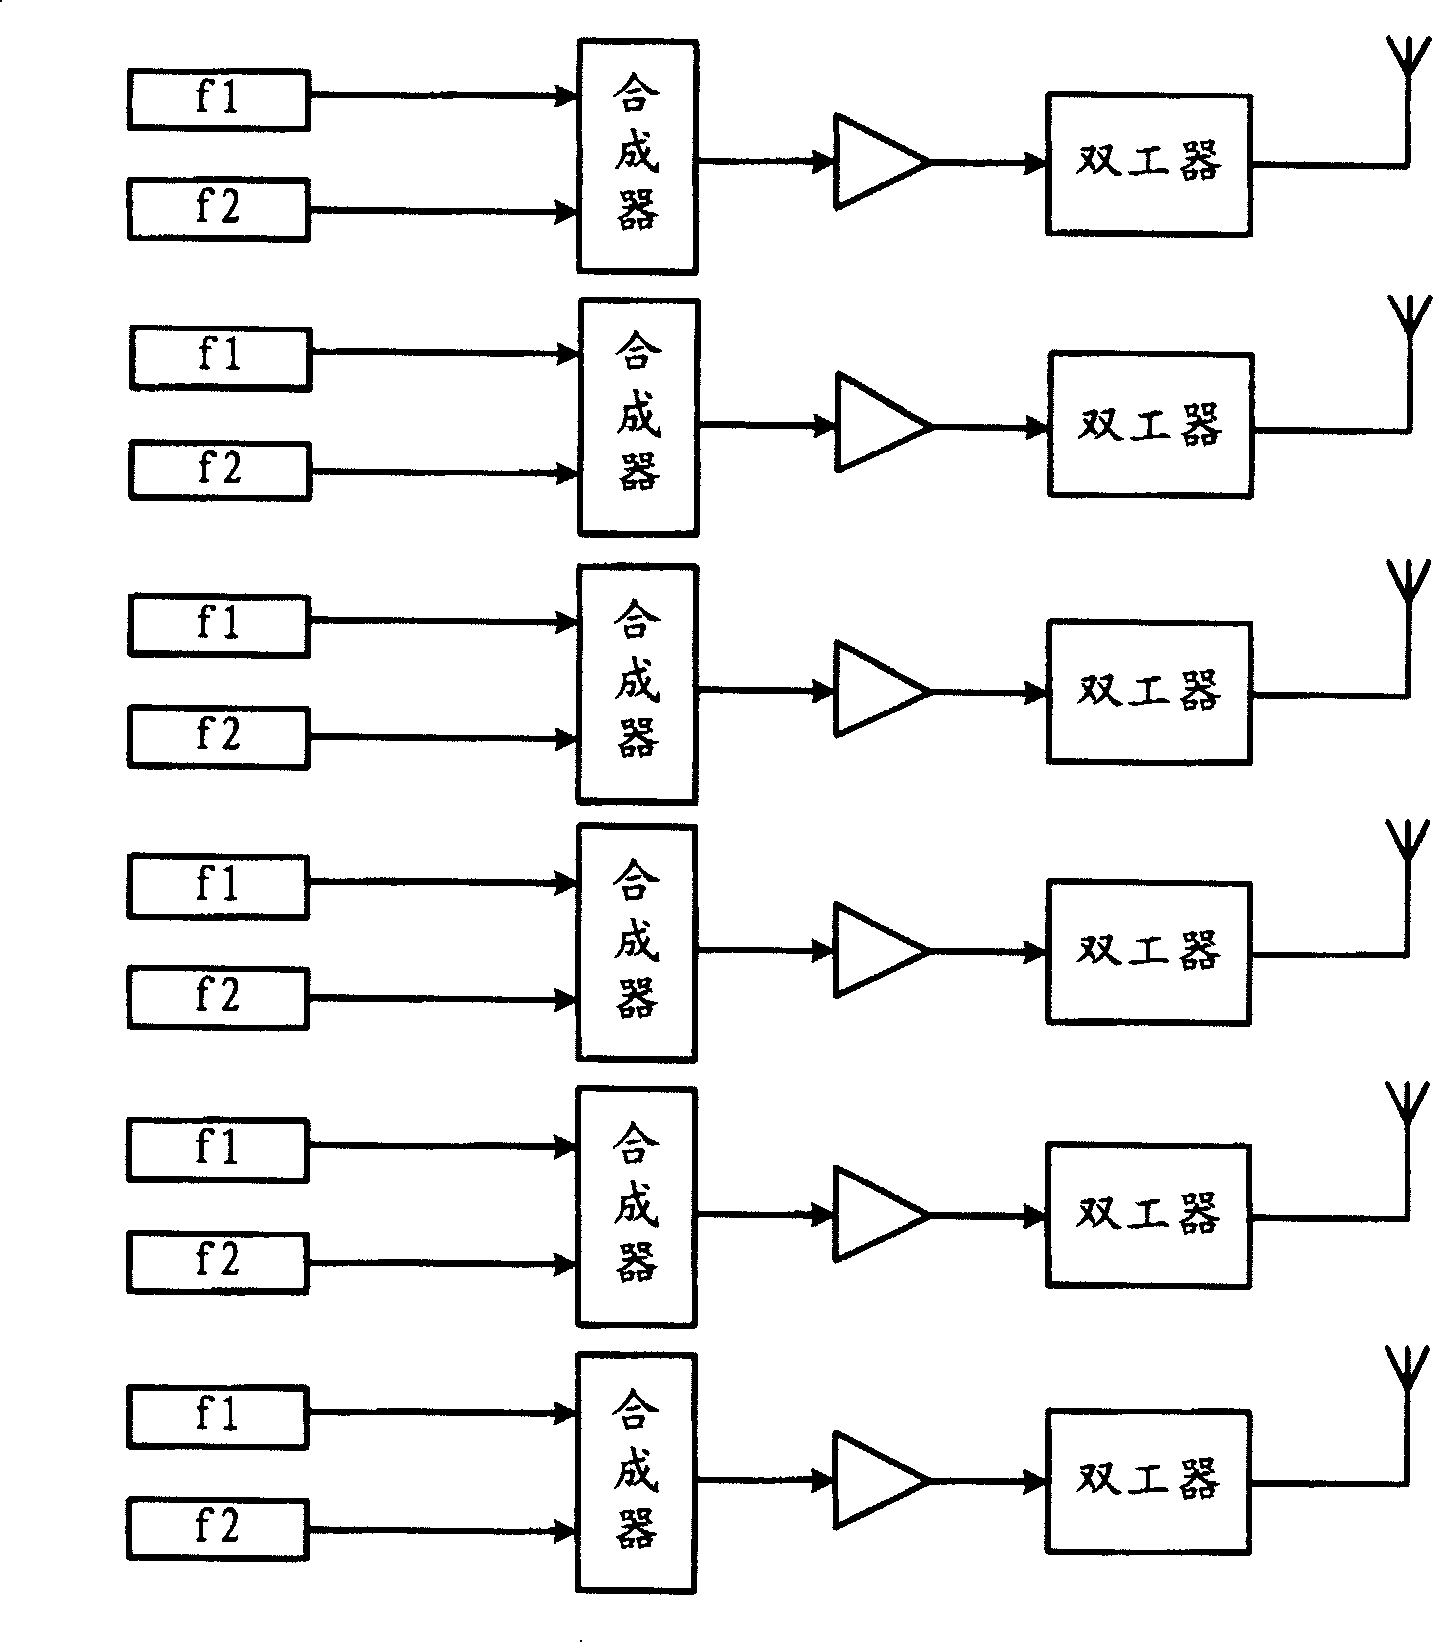 Raio frequency back plate capable of realizing configuration switched